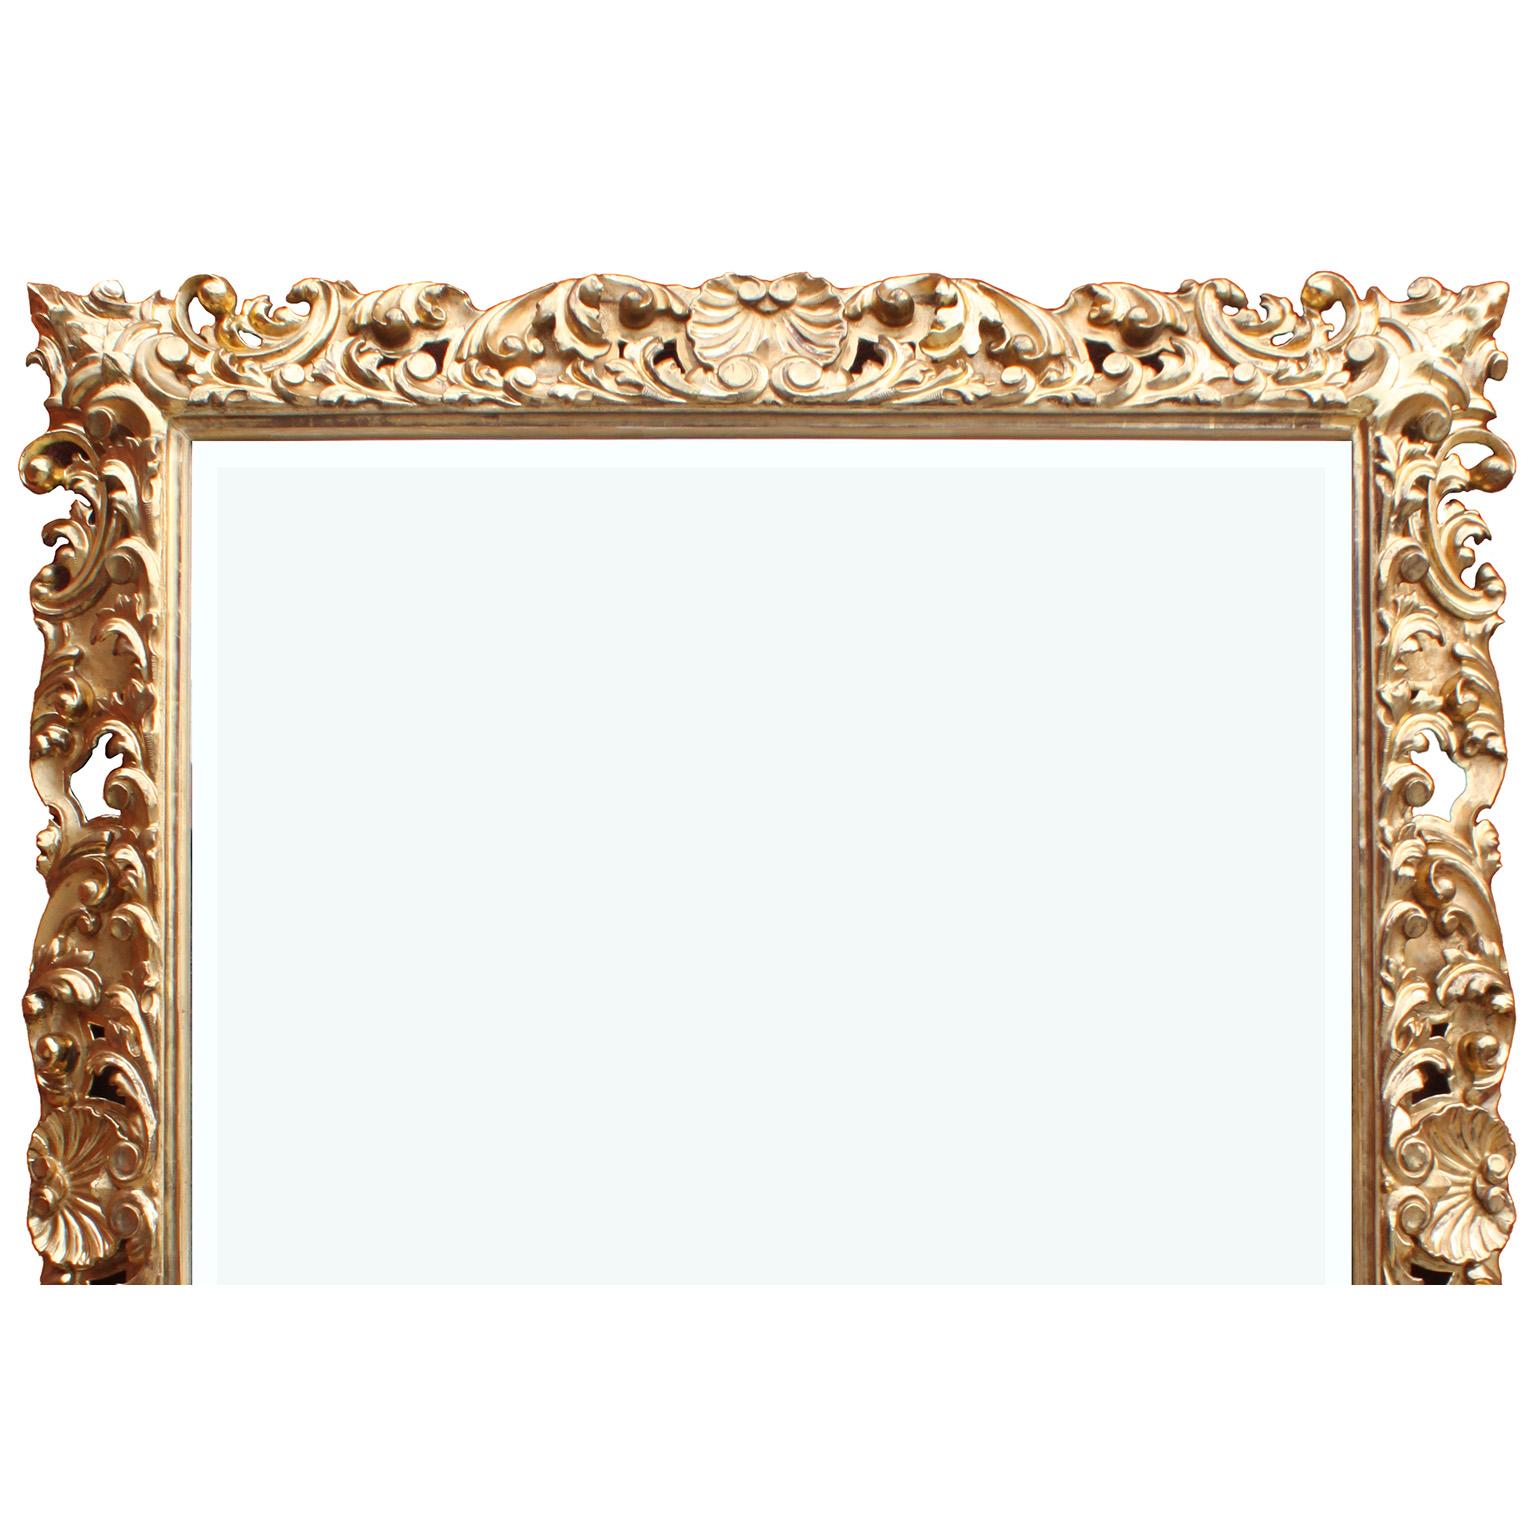 A fine, large and impressive Italian 19th century Baroque Revival style giltwood carved mirror frame. The ornately carved rectangular shaped frame, with floral, scrolled and seashell carved frame, which can be hanged either vertically or